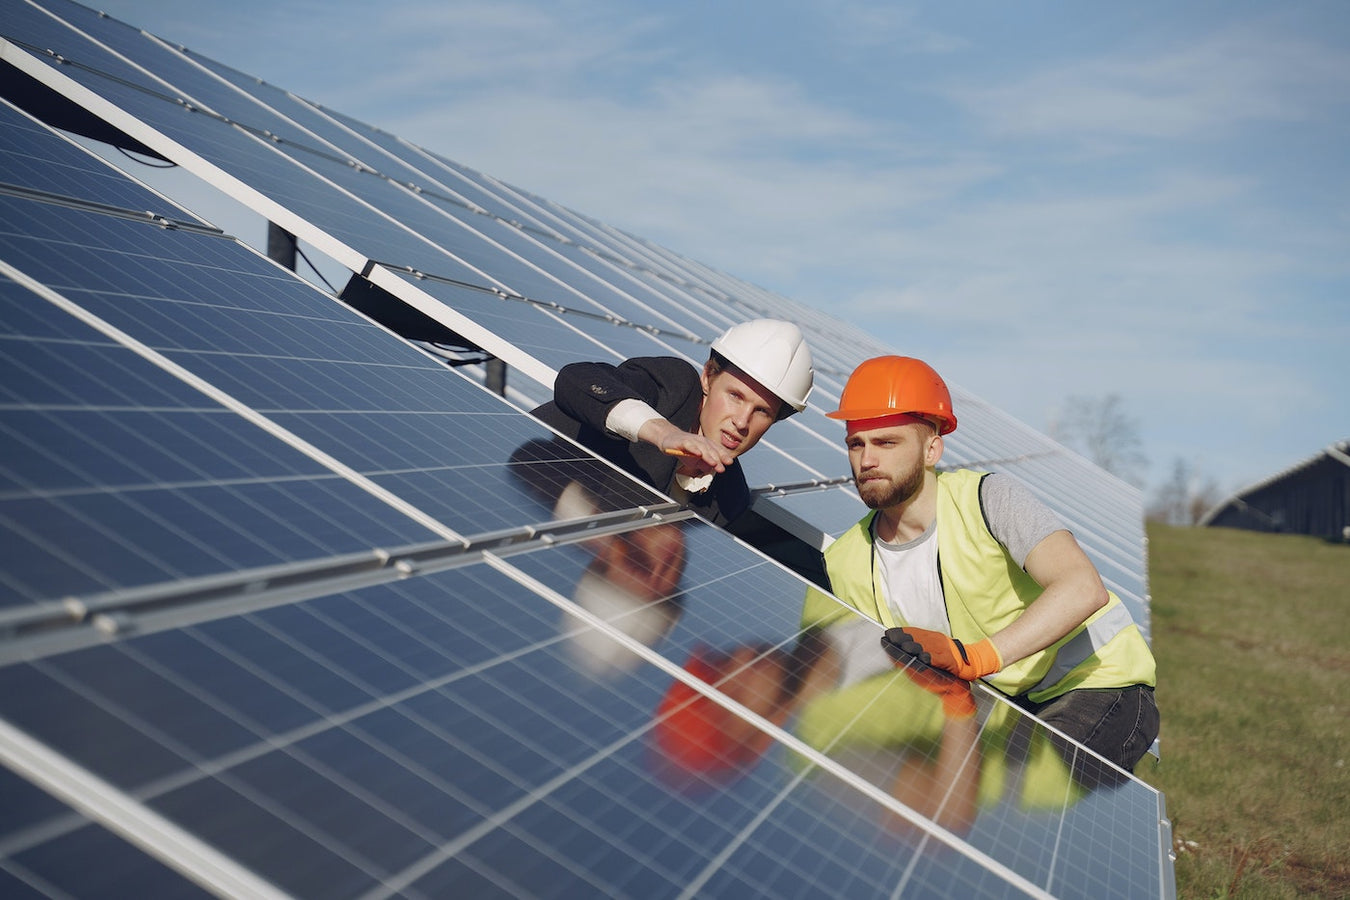 Two people in hardhats looking at solar panels.